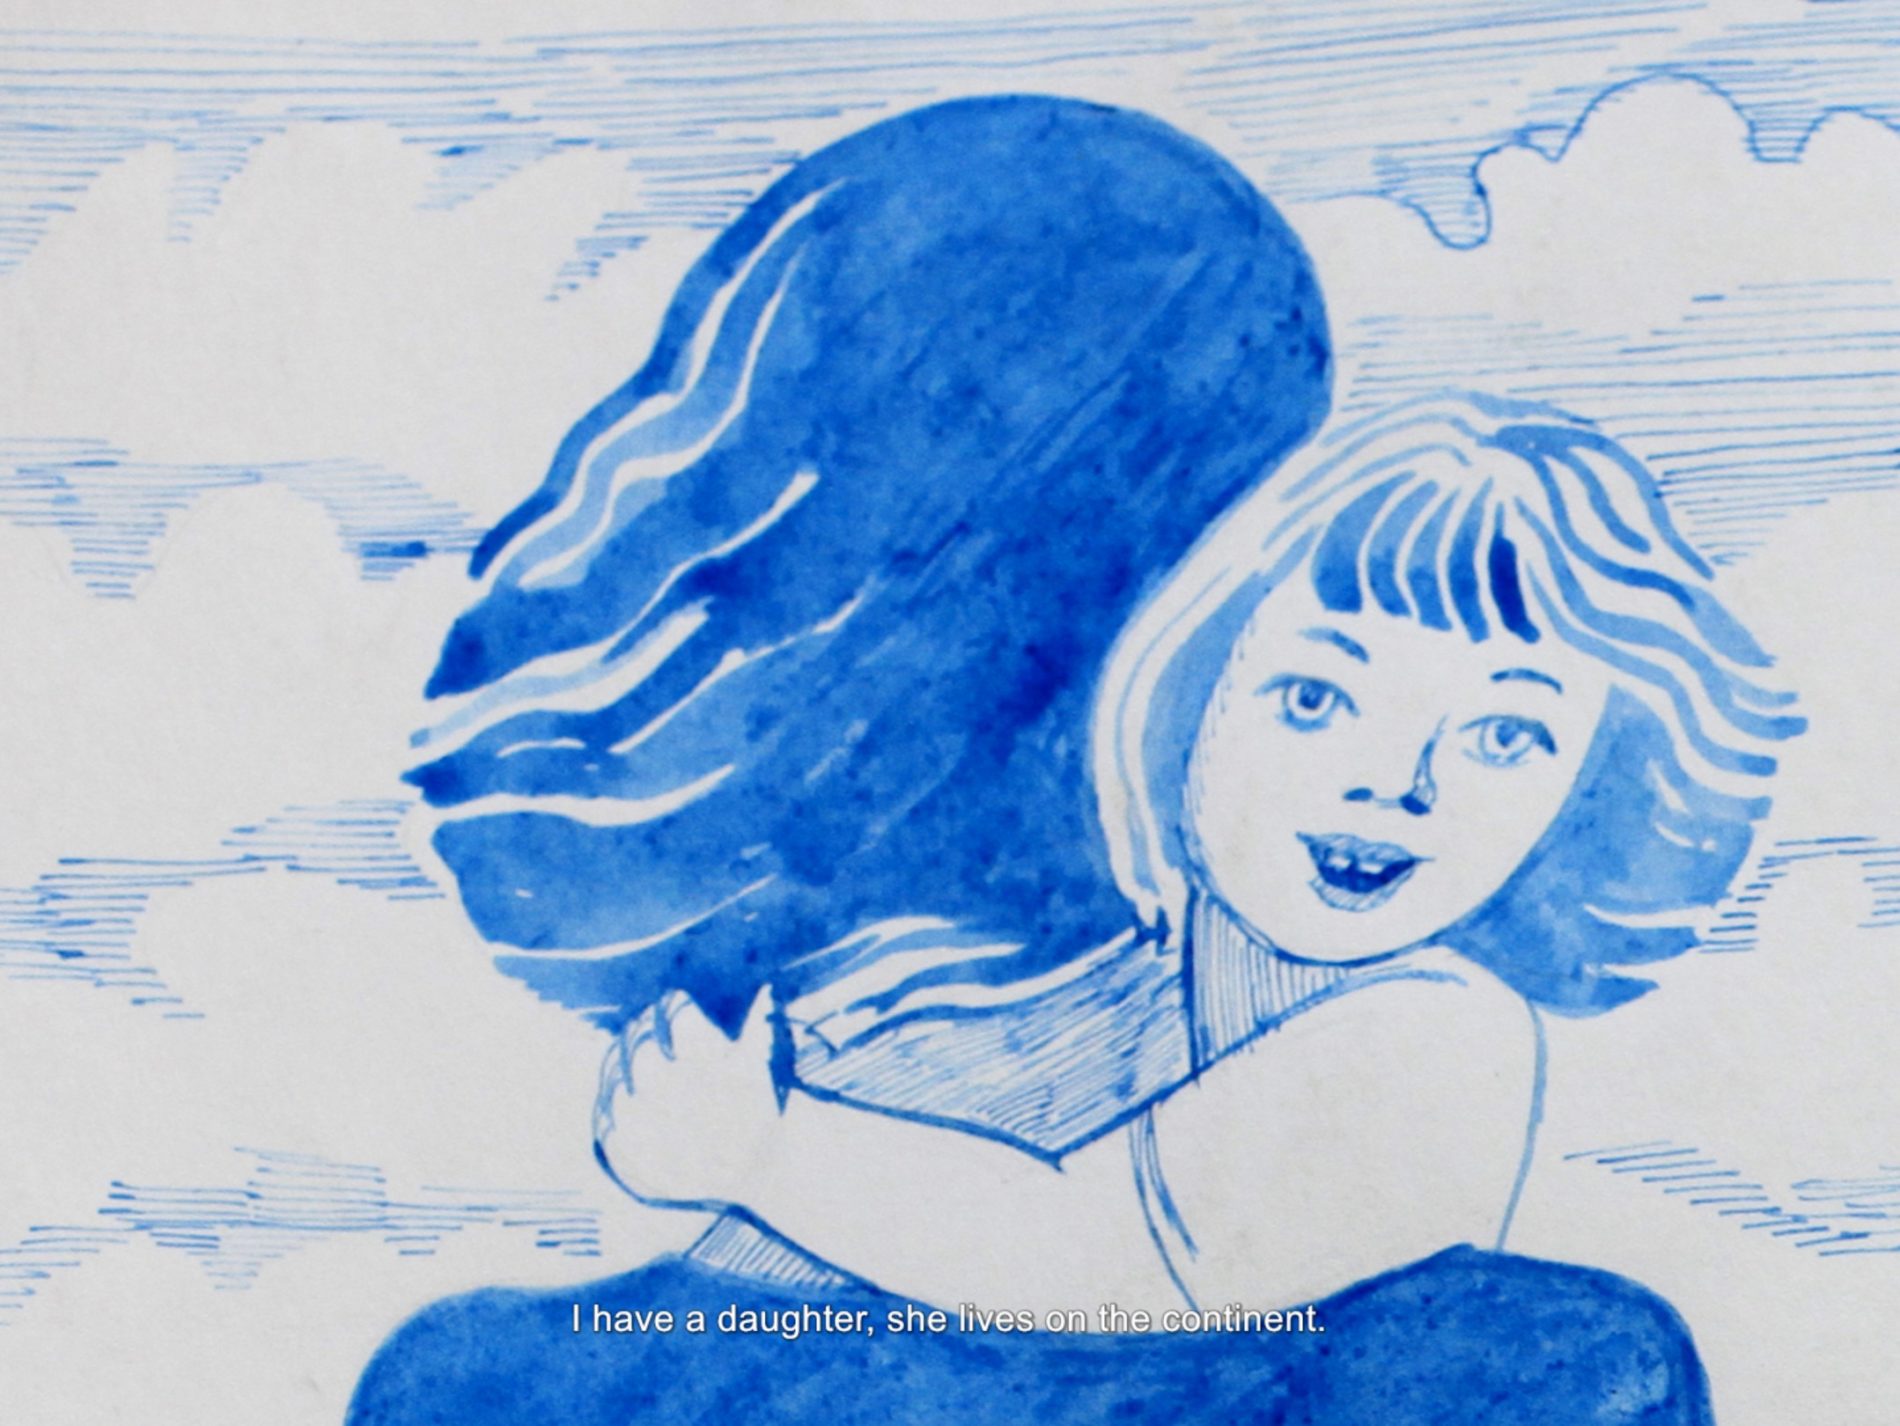 video still of a blue and white painting of woman and young girl